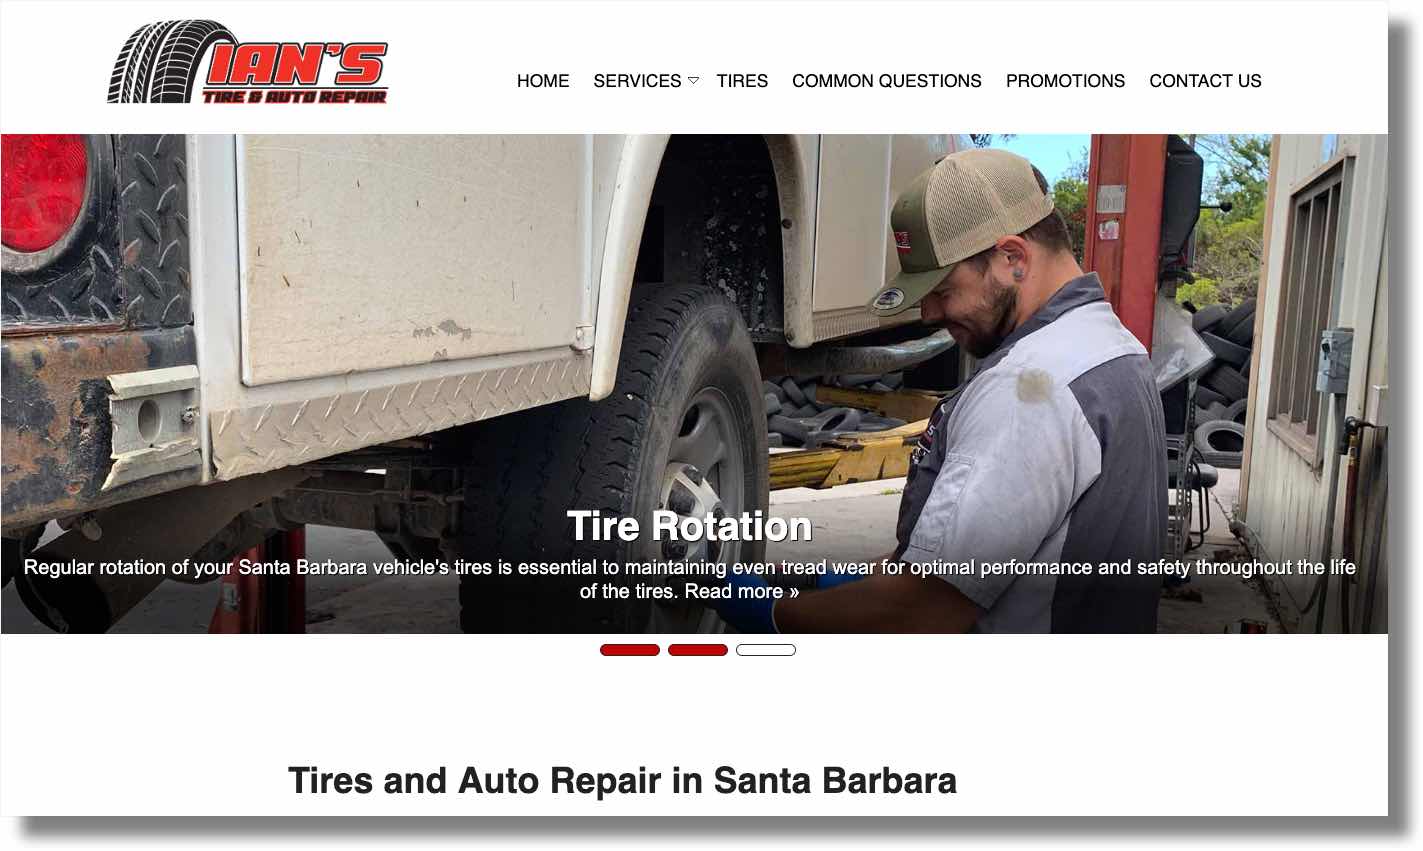 Ian's Tire and Auto Repair